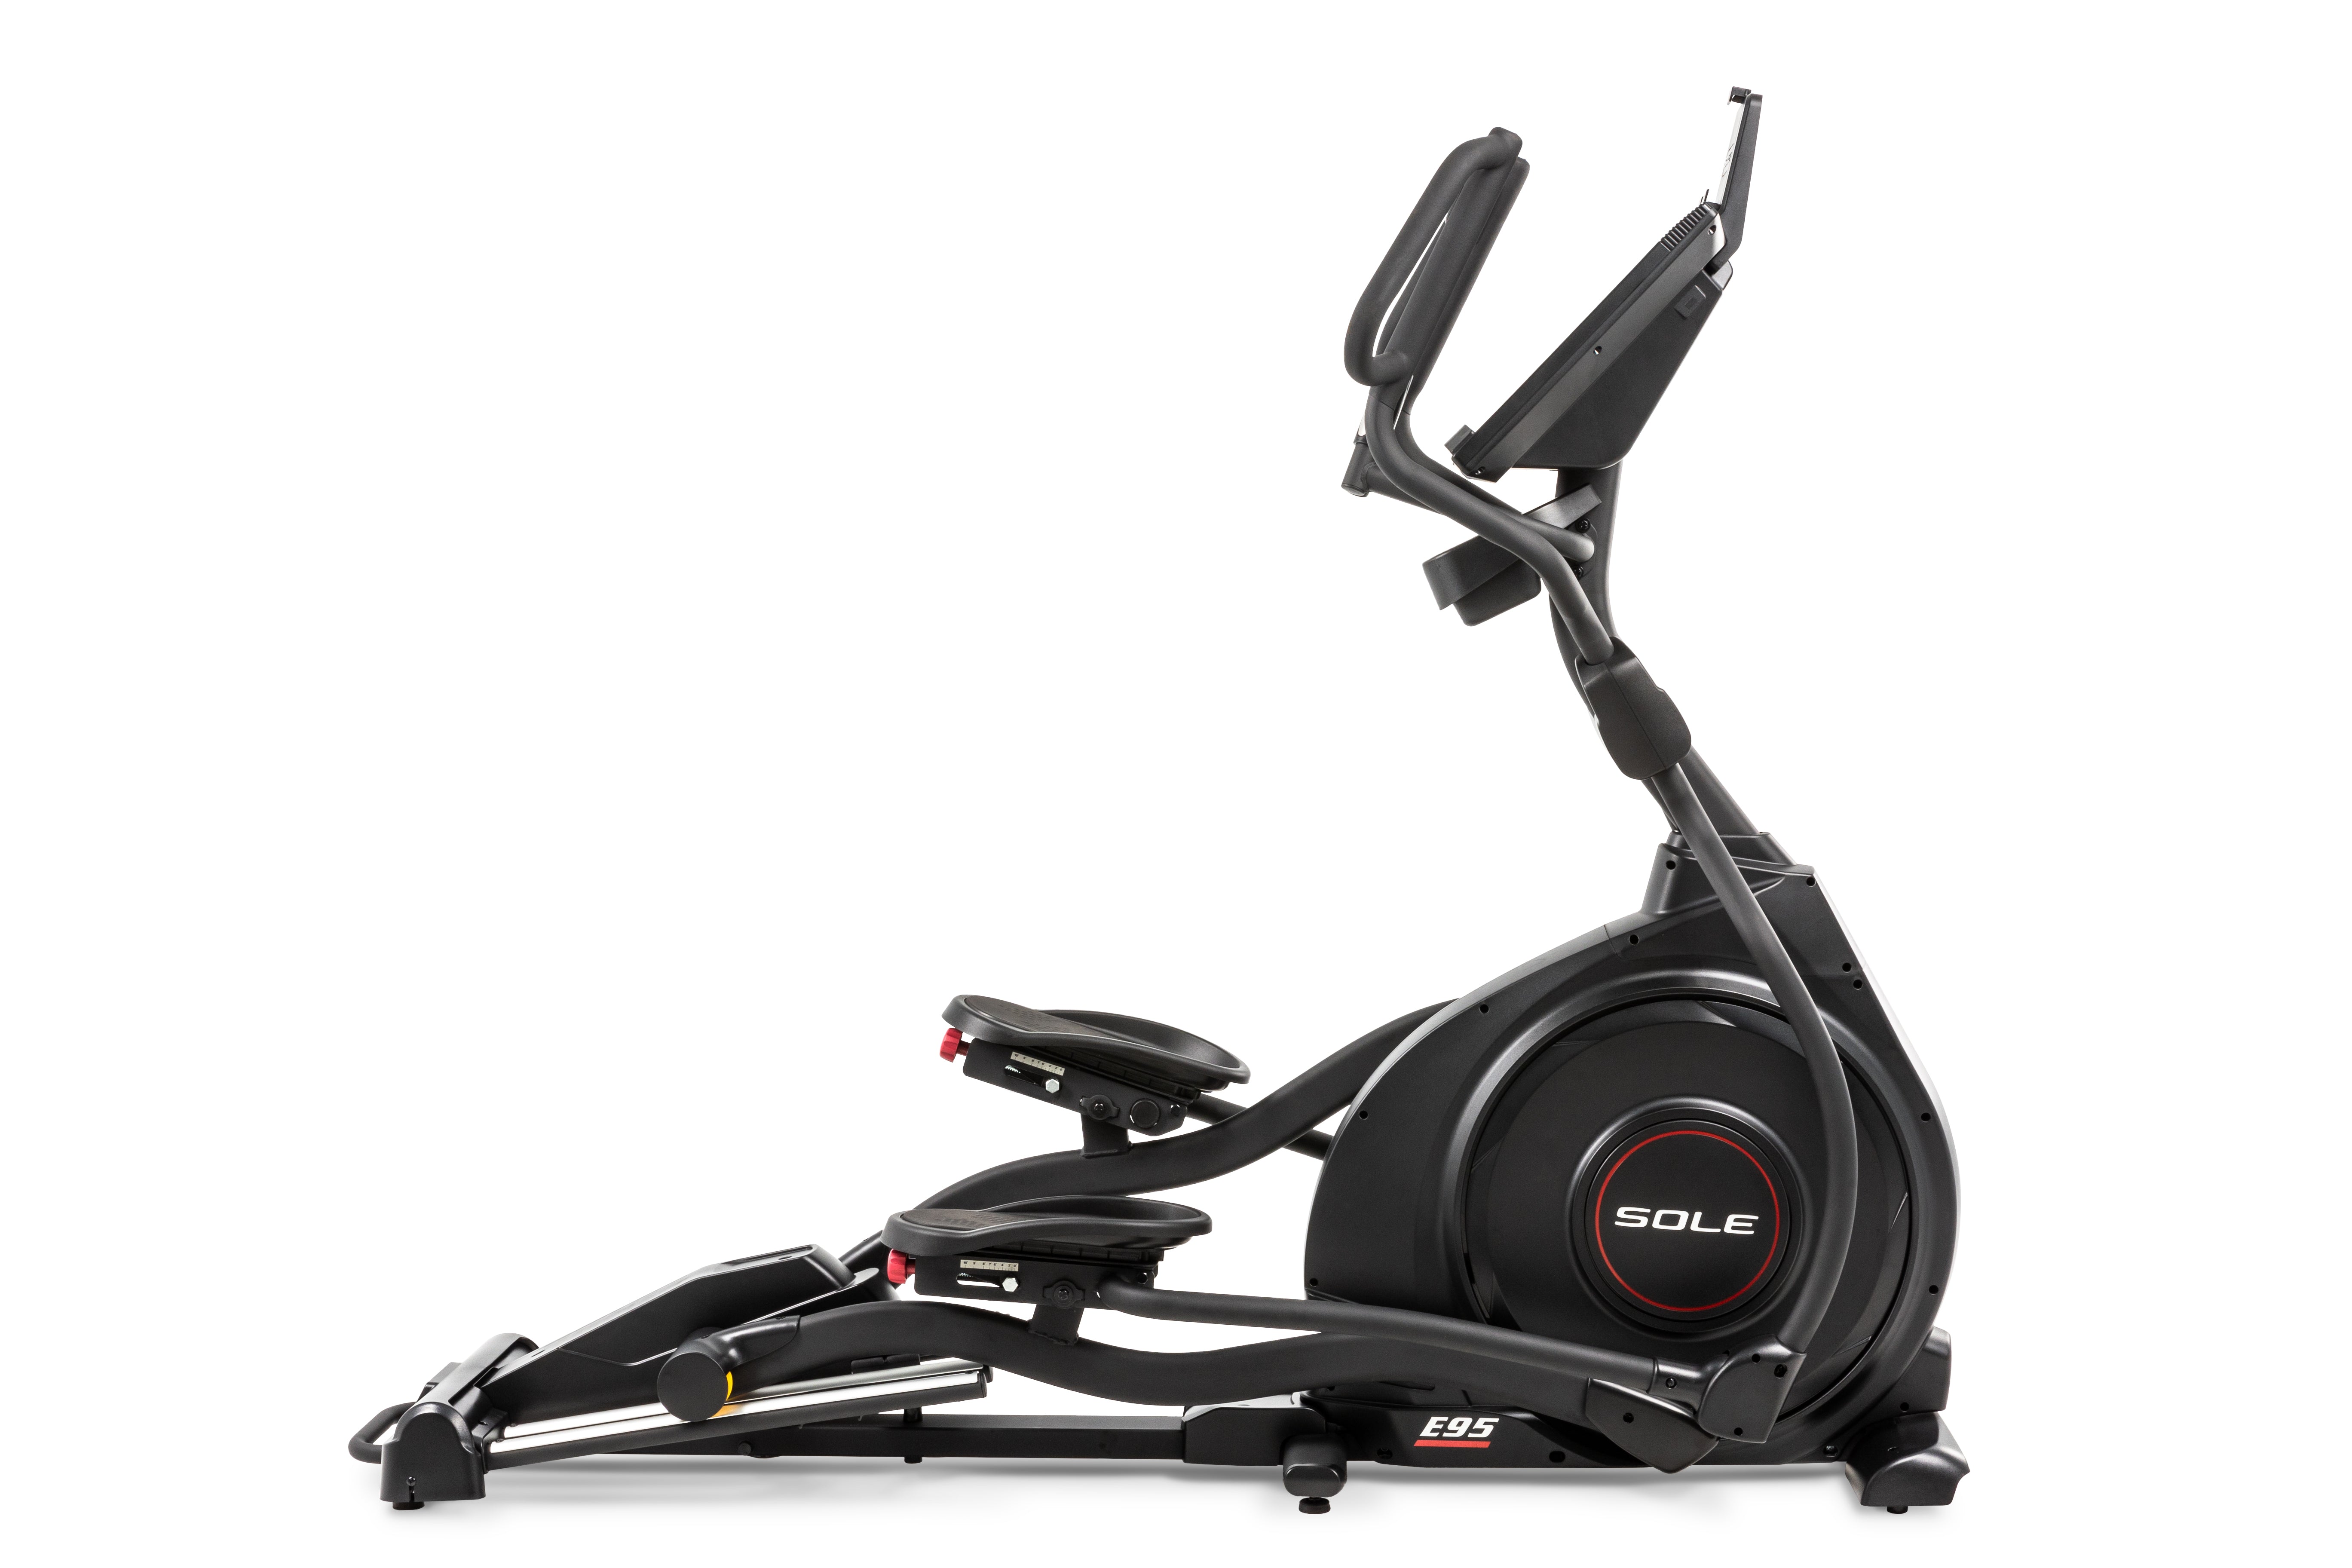 Side view of the Sole E95 elliptical machine, showcasing its sleek black design with a large flywheel housing branded 'SOLE'. The machine features adjustable foot pedals with red dials, dual handlebars with integrated controls, and an elevated console displaying workout metrics.